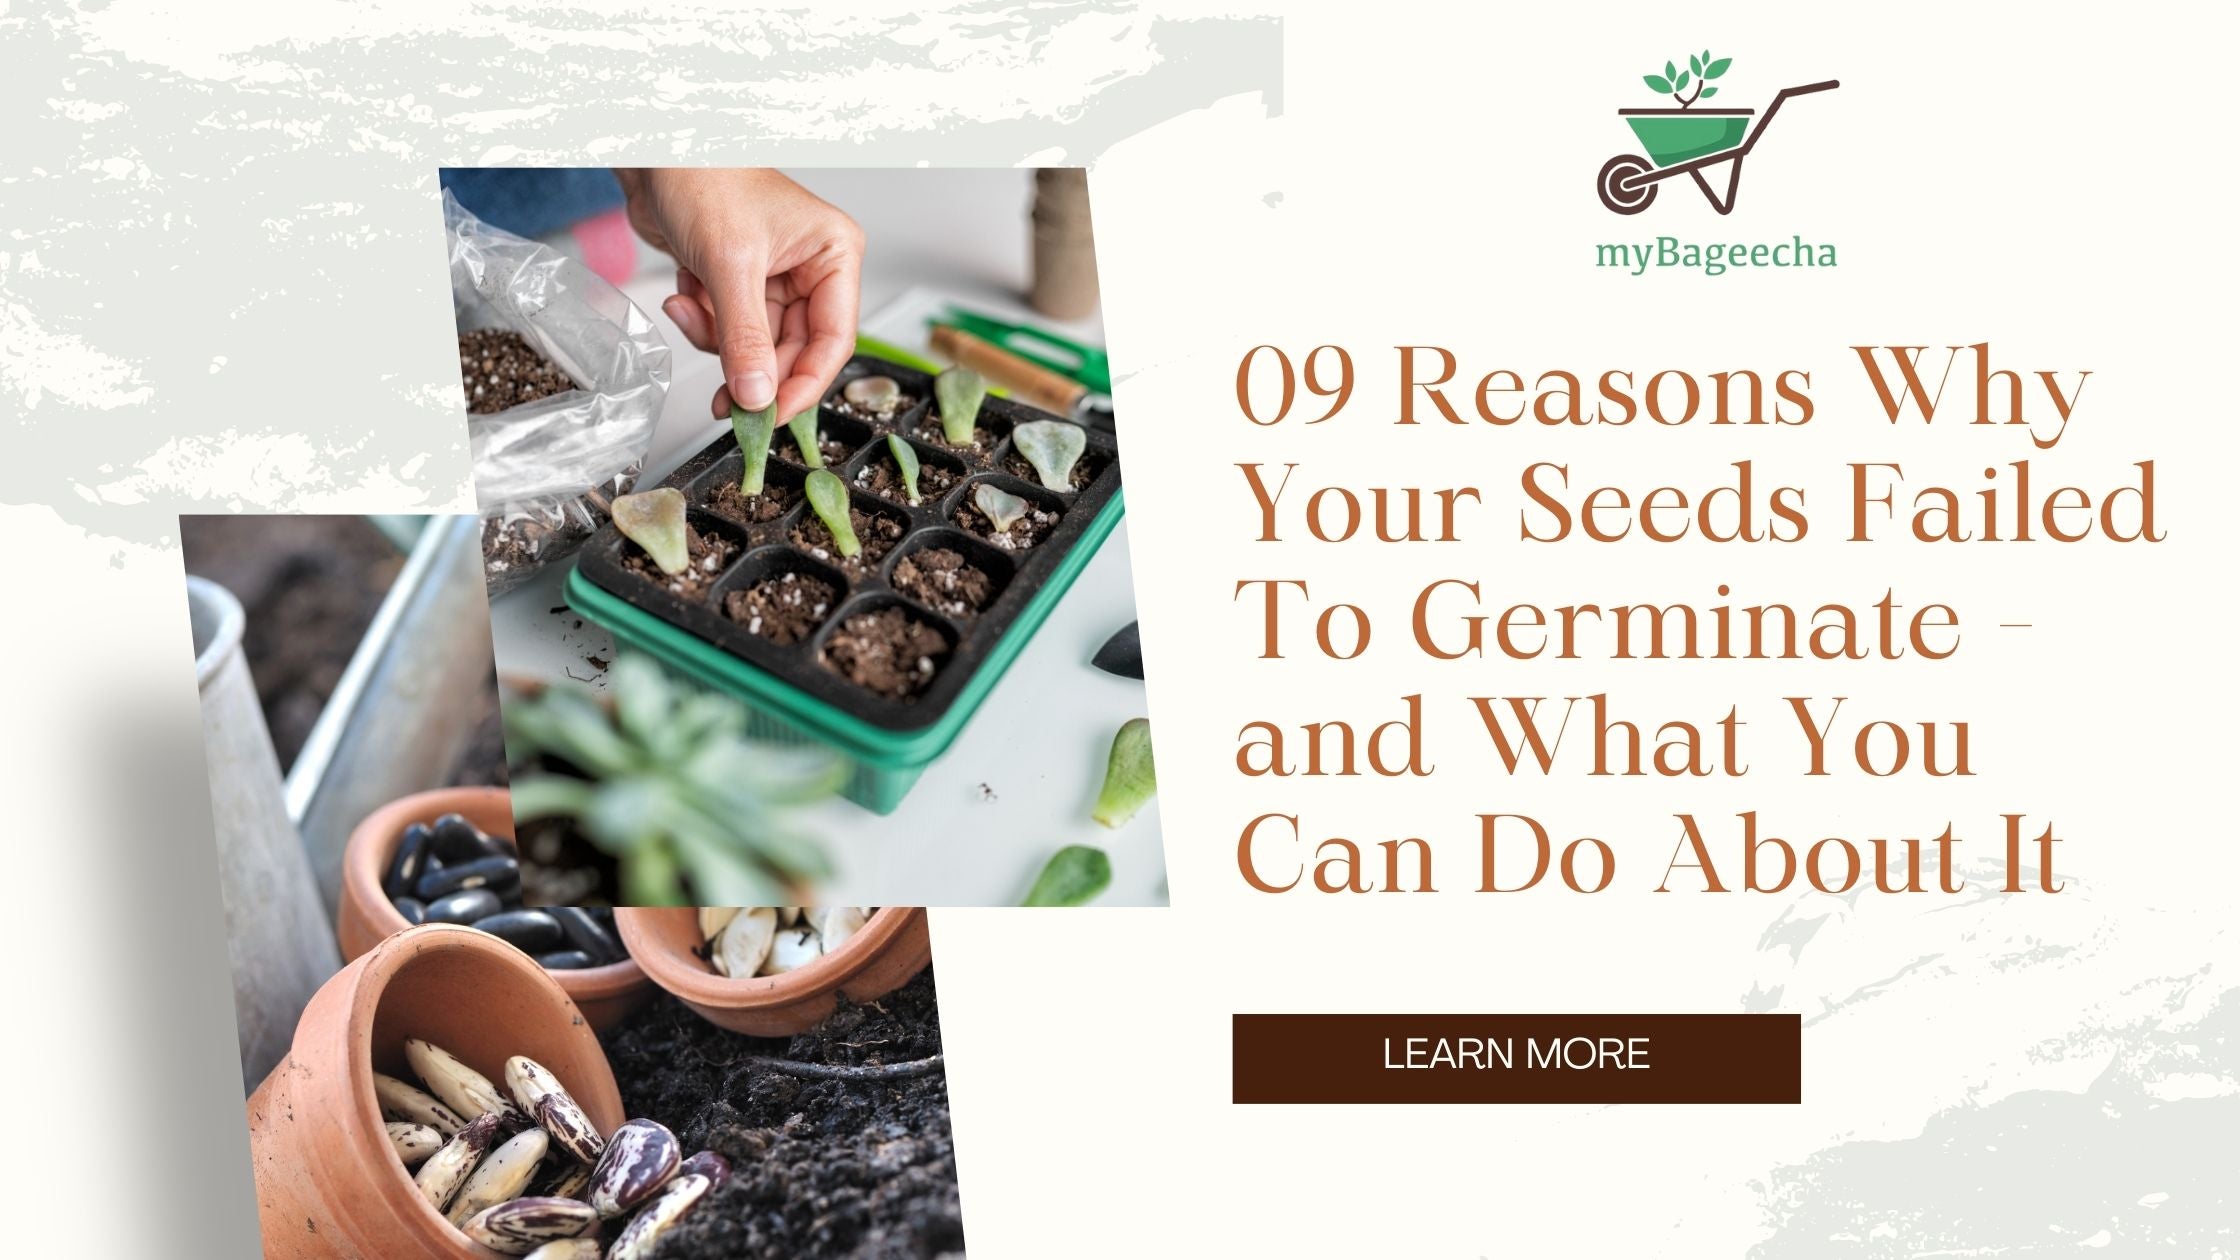 9 Reasons Why Your Seeds Failed To Germinate - and What You Can Do About It